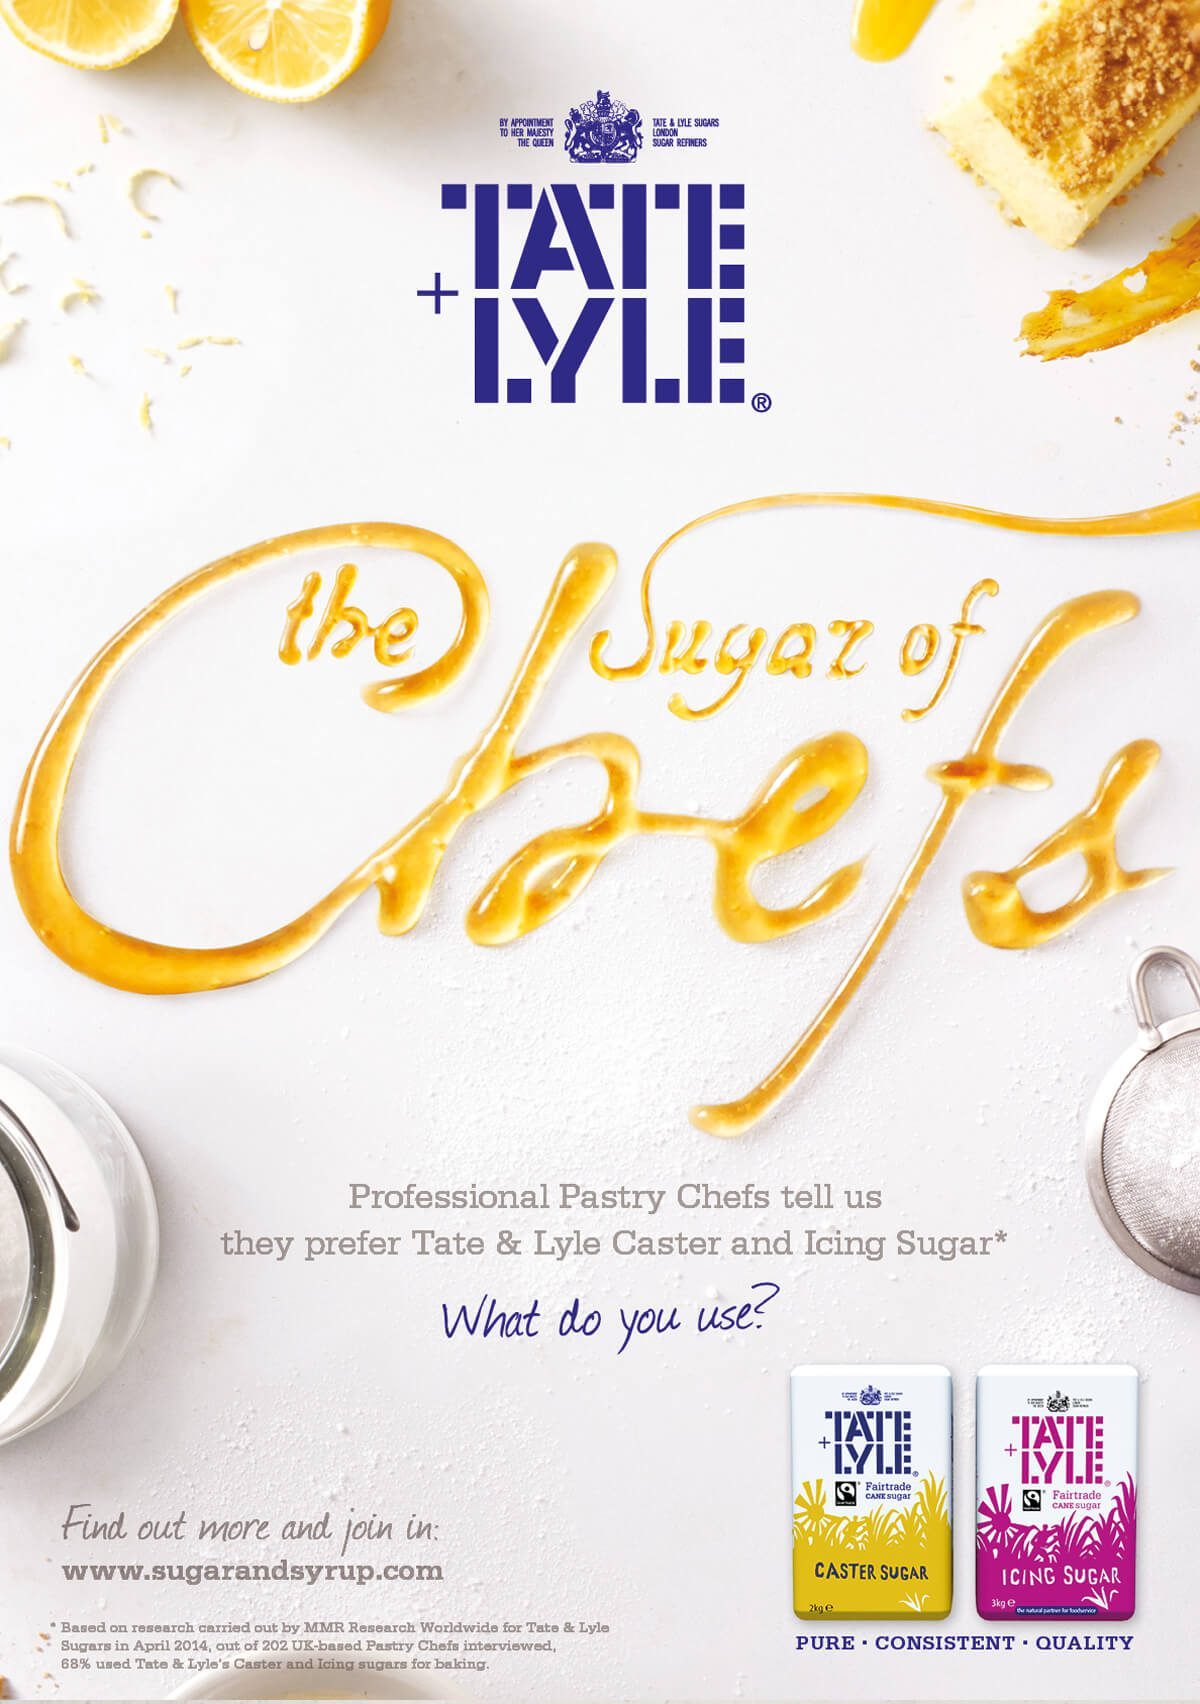 Tate and lyle the sugar of chefs advert